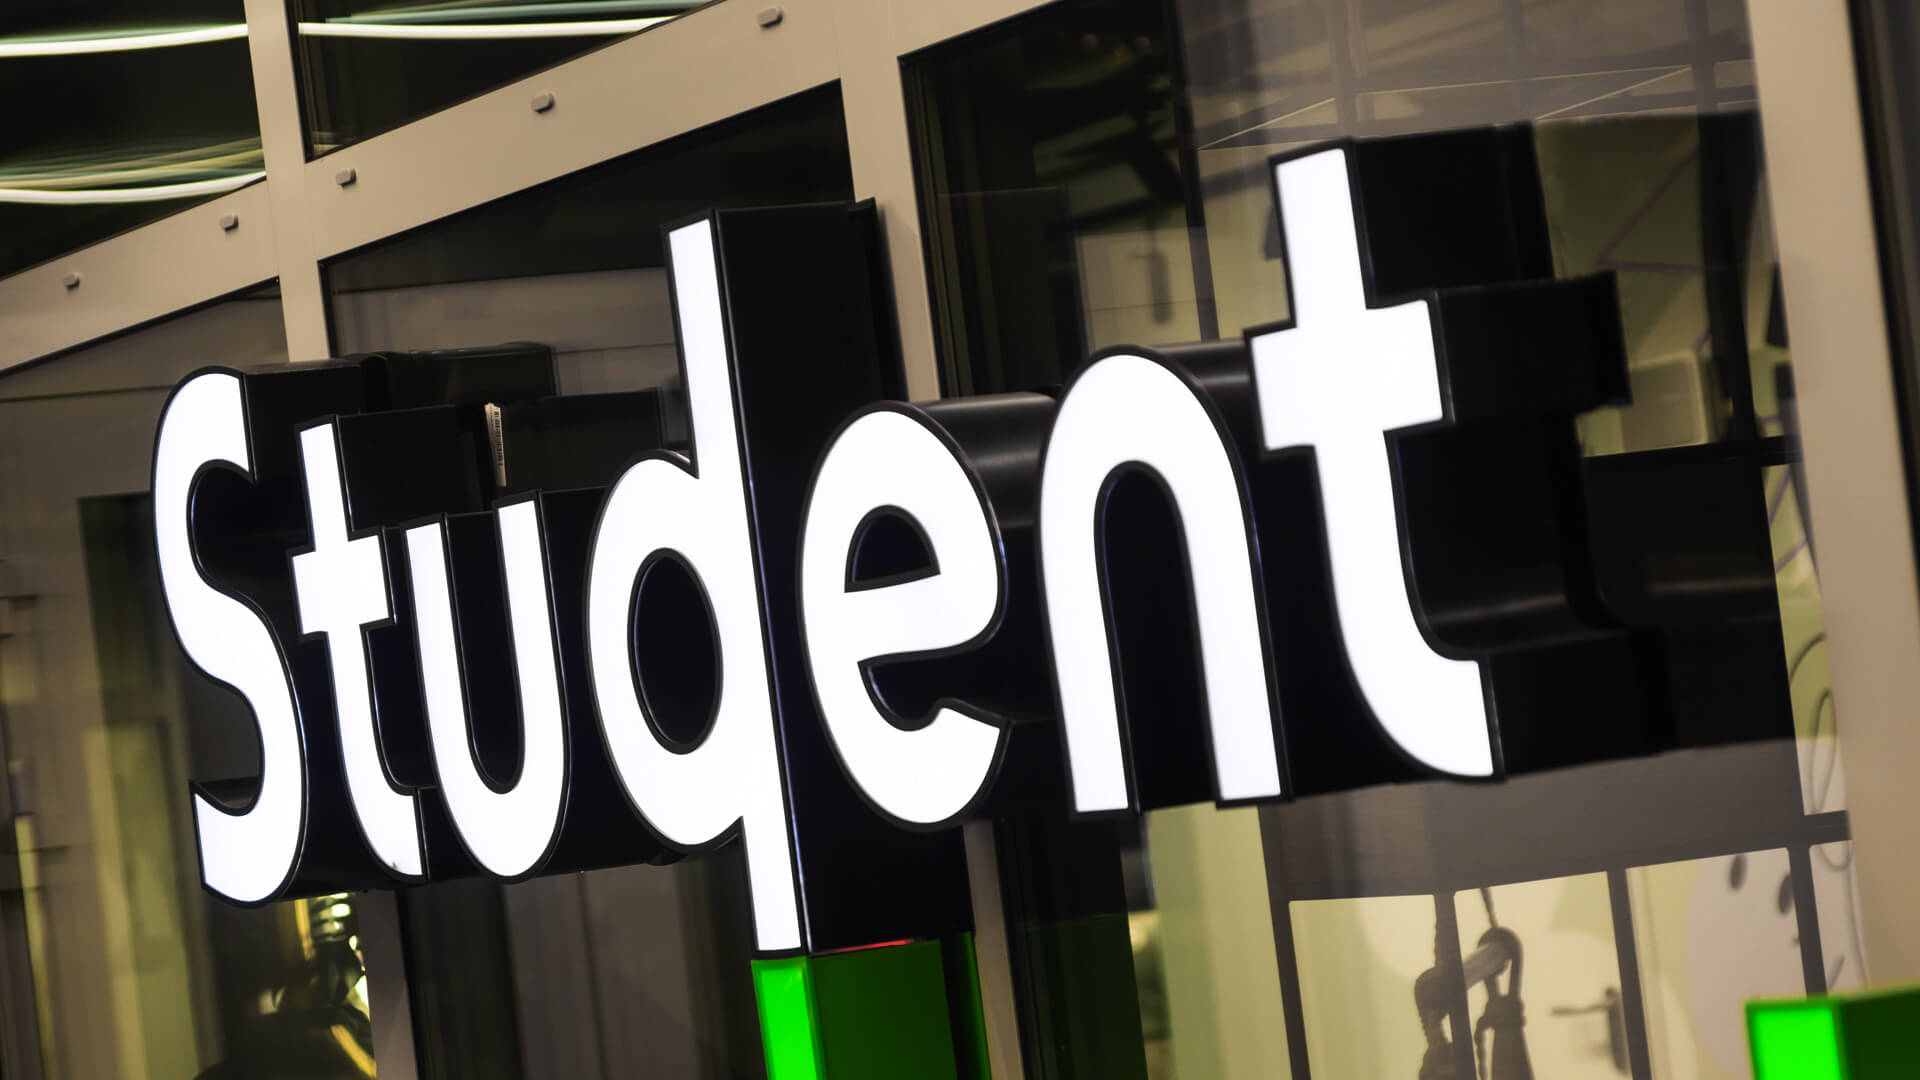 student depot - student-depot-spatial-letters-letters-at-the-entry-literals-at-the-window-letters-at-the-panel-green-letters-at-the-order-logo-firm-letters-at-height-eye-letters-with-plexi-gdansk-at (1)